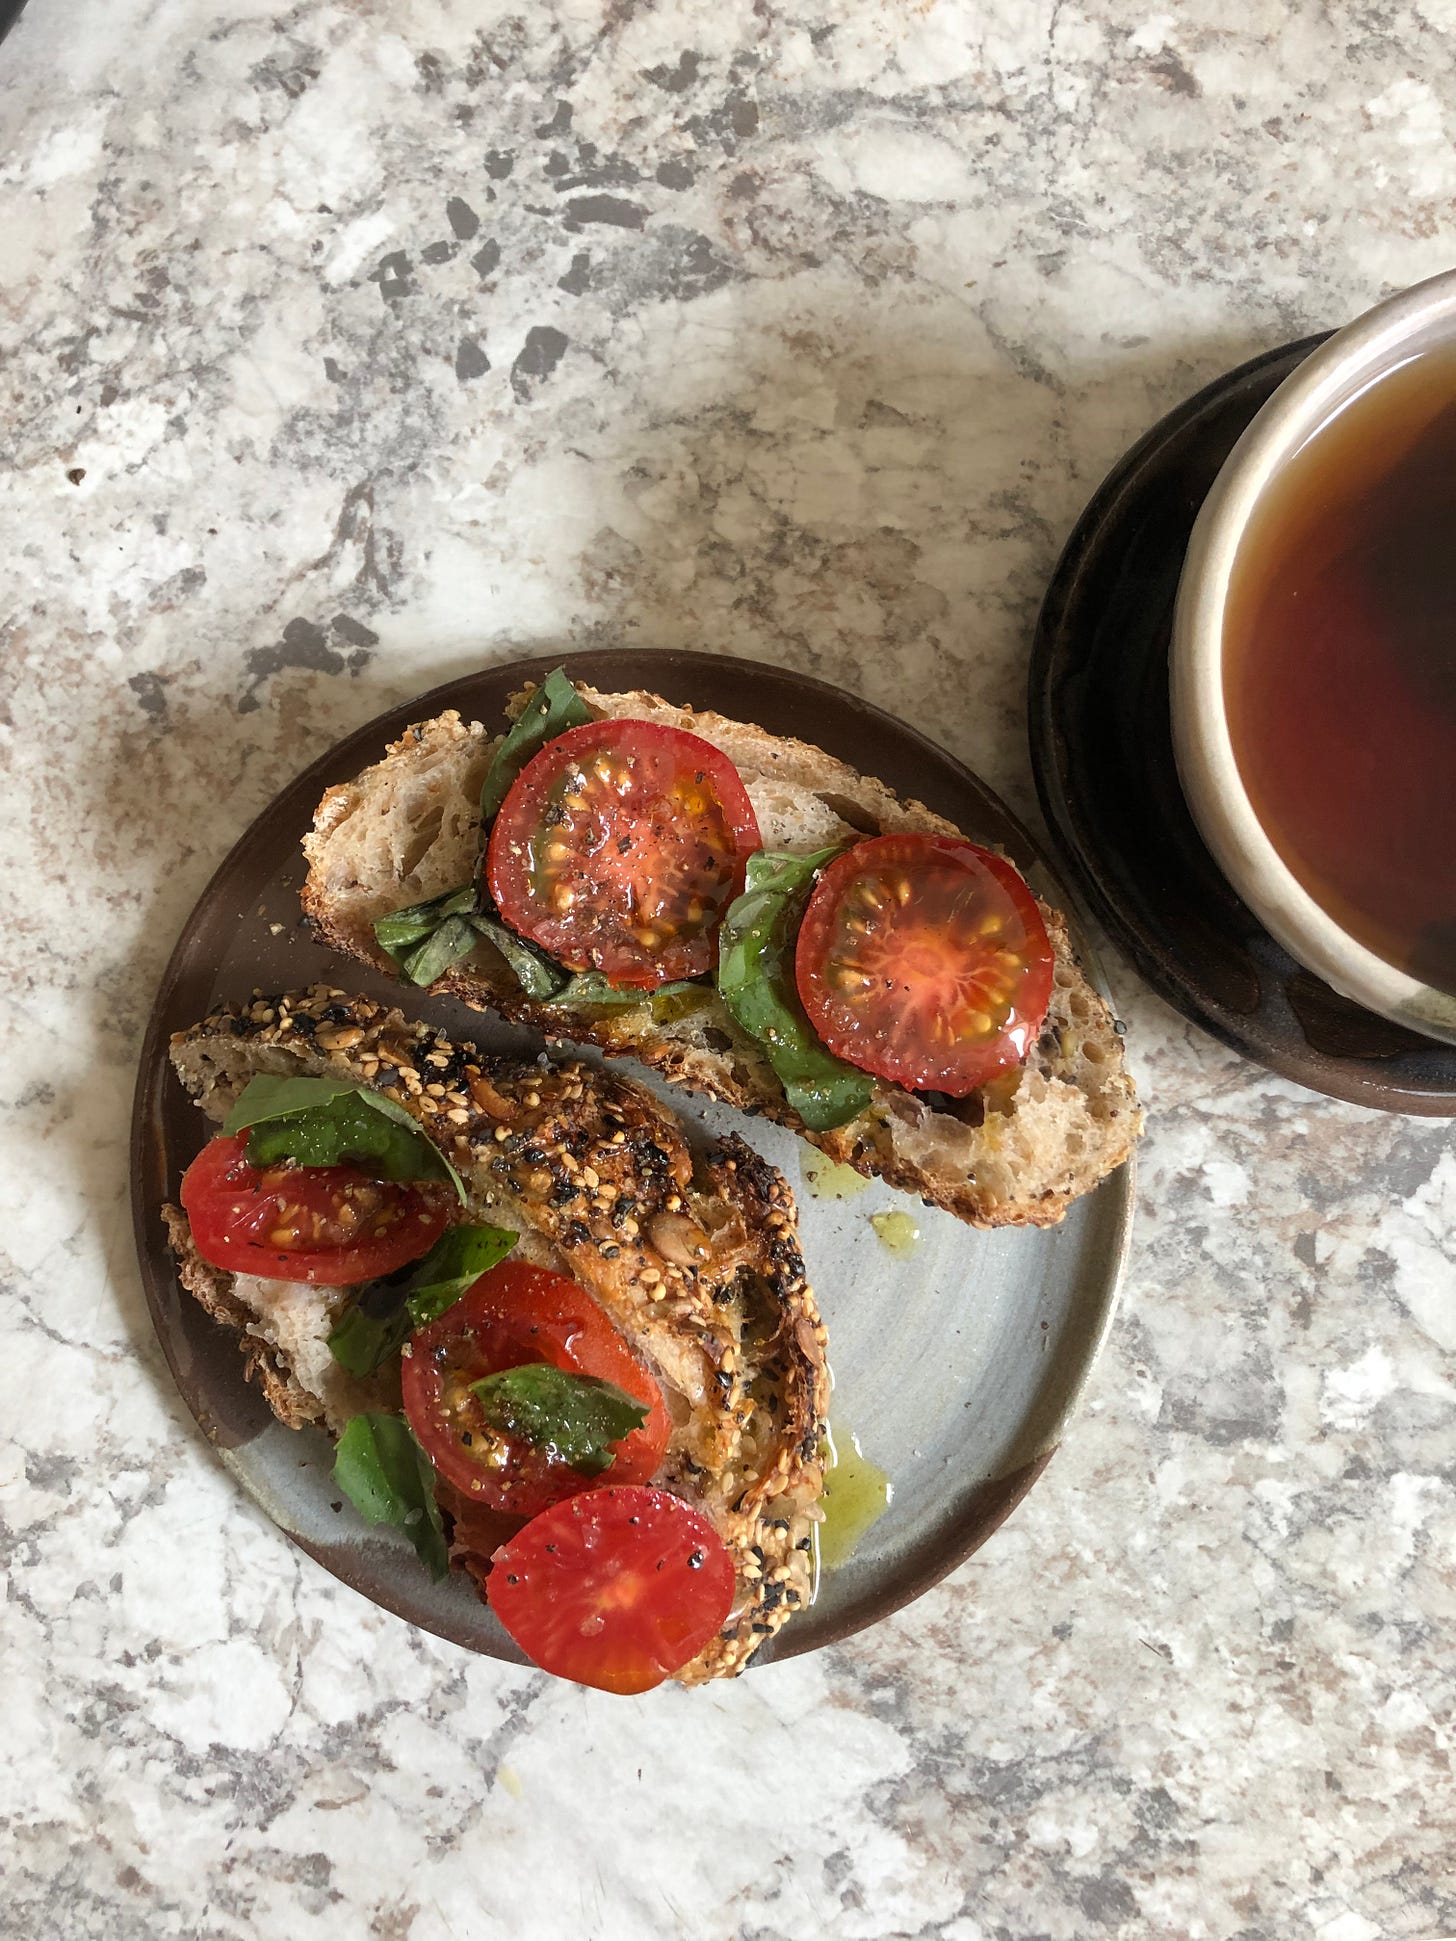 Tomato on sourdough drizzled in olive oil and garnished with basil, fresh cracked pepper and flakey salt.